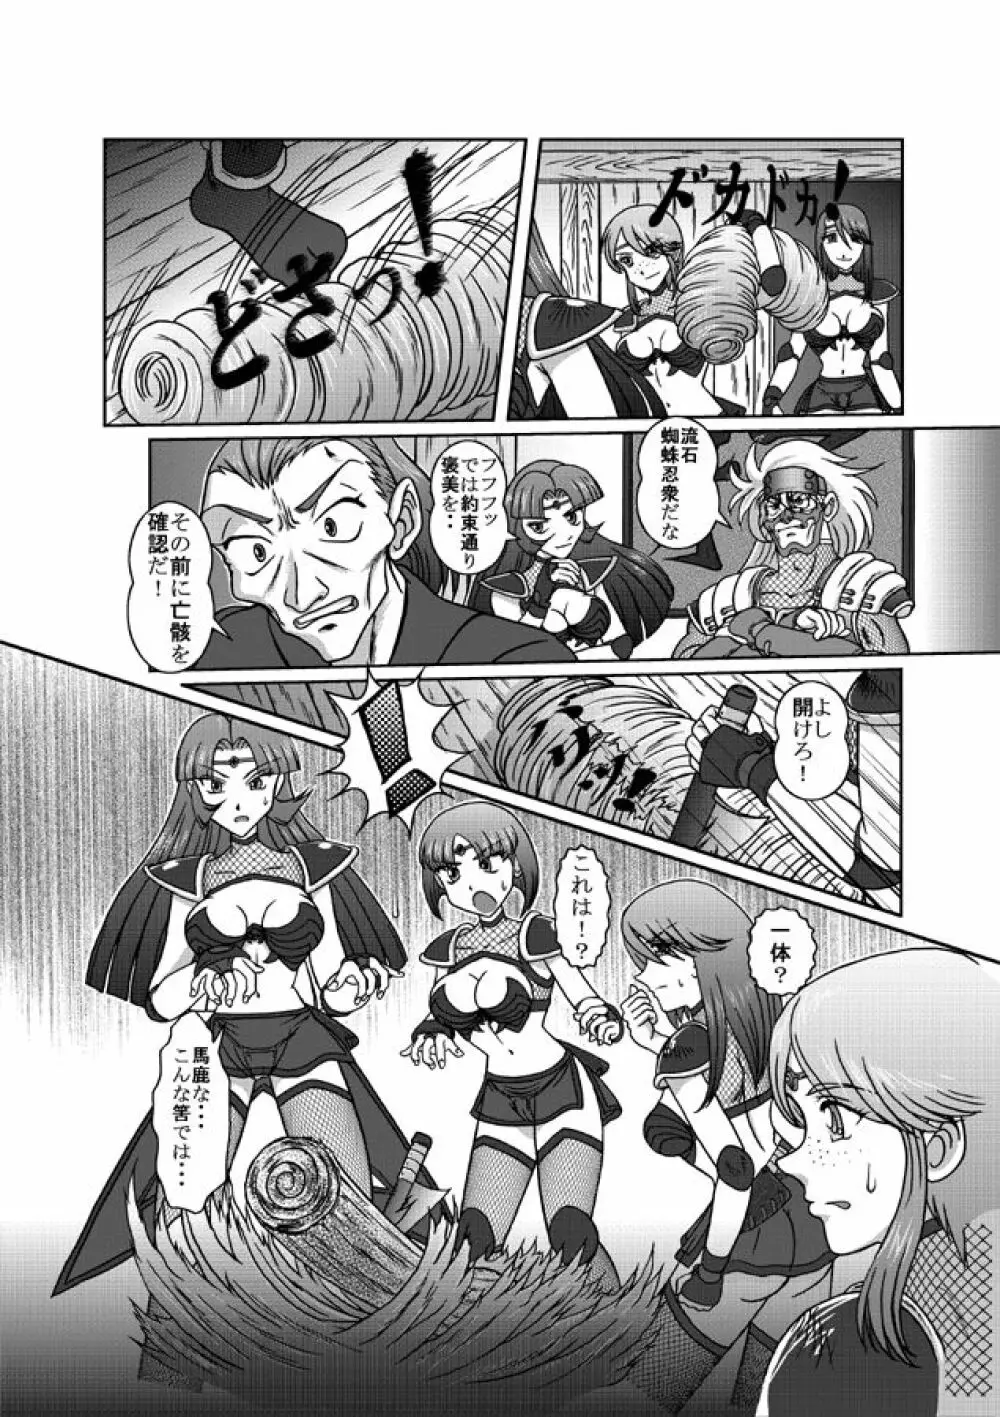 Same-themed manga about kid fighting female ninjas from japanese imageboard. Page.22